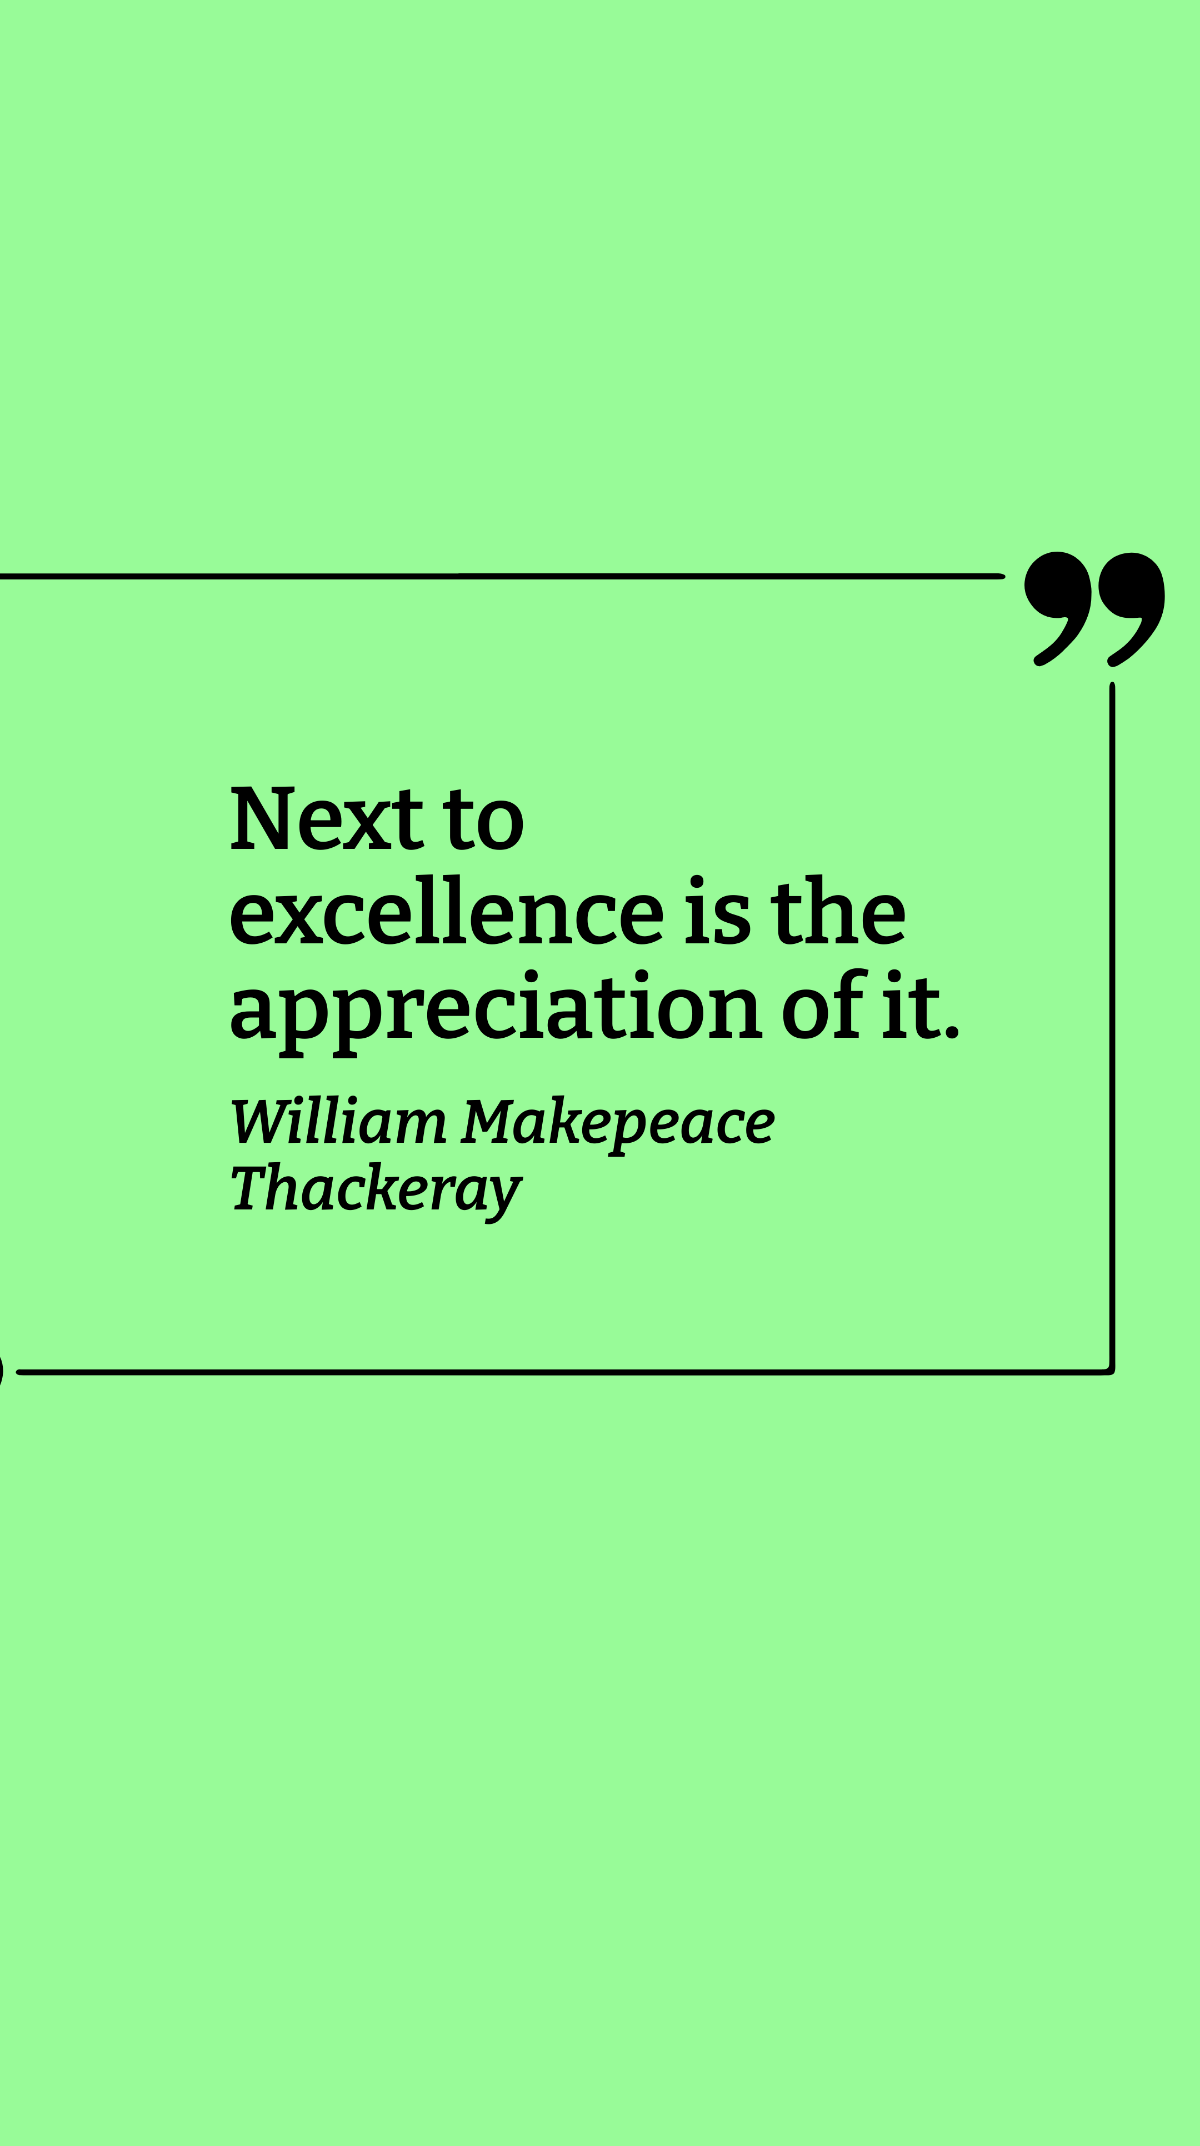 Free William Makepeace Thackeray - Next to excellence is the appreciation of it. Template